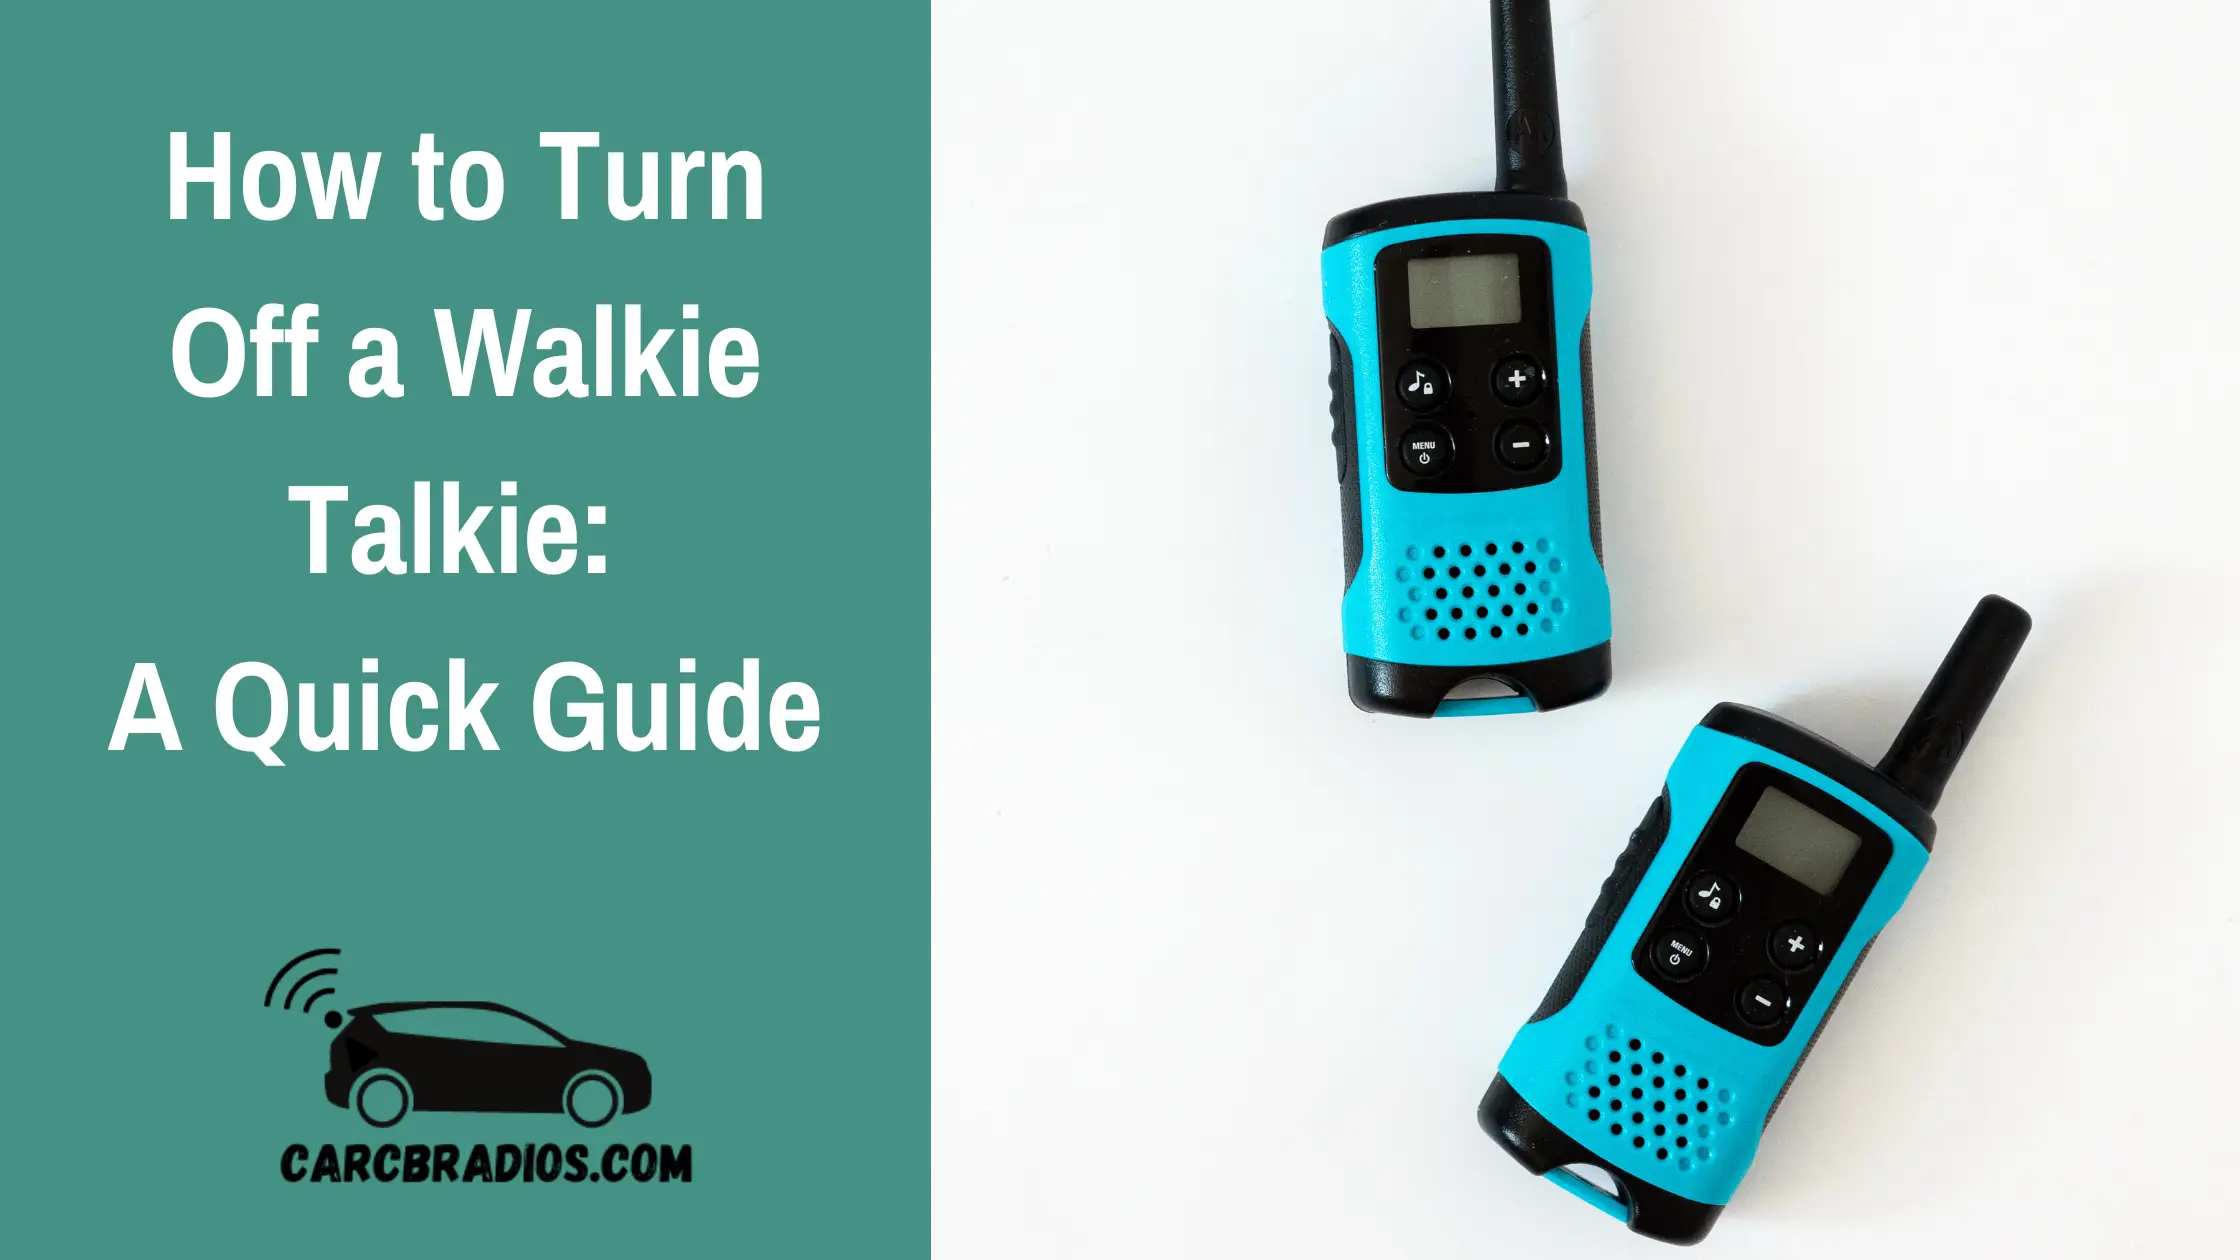 How to Turn Off a Walkie Talkie: A Quick Guide